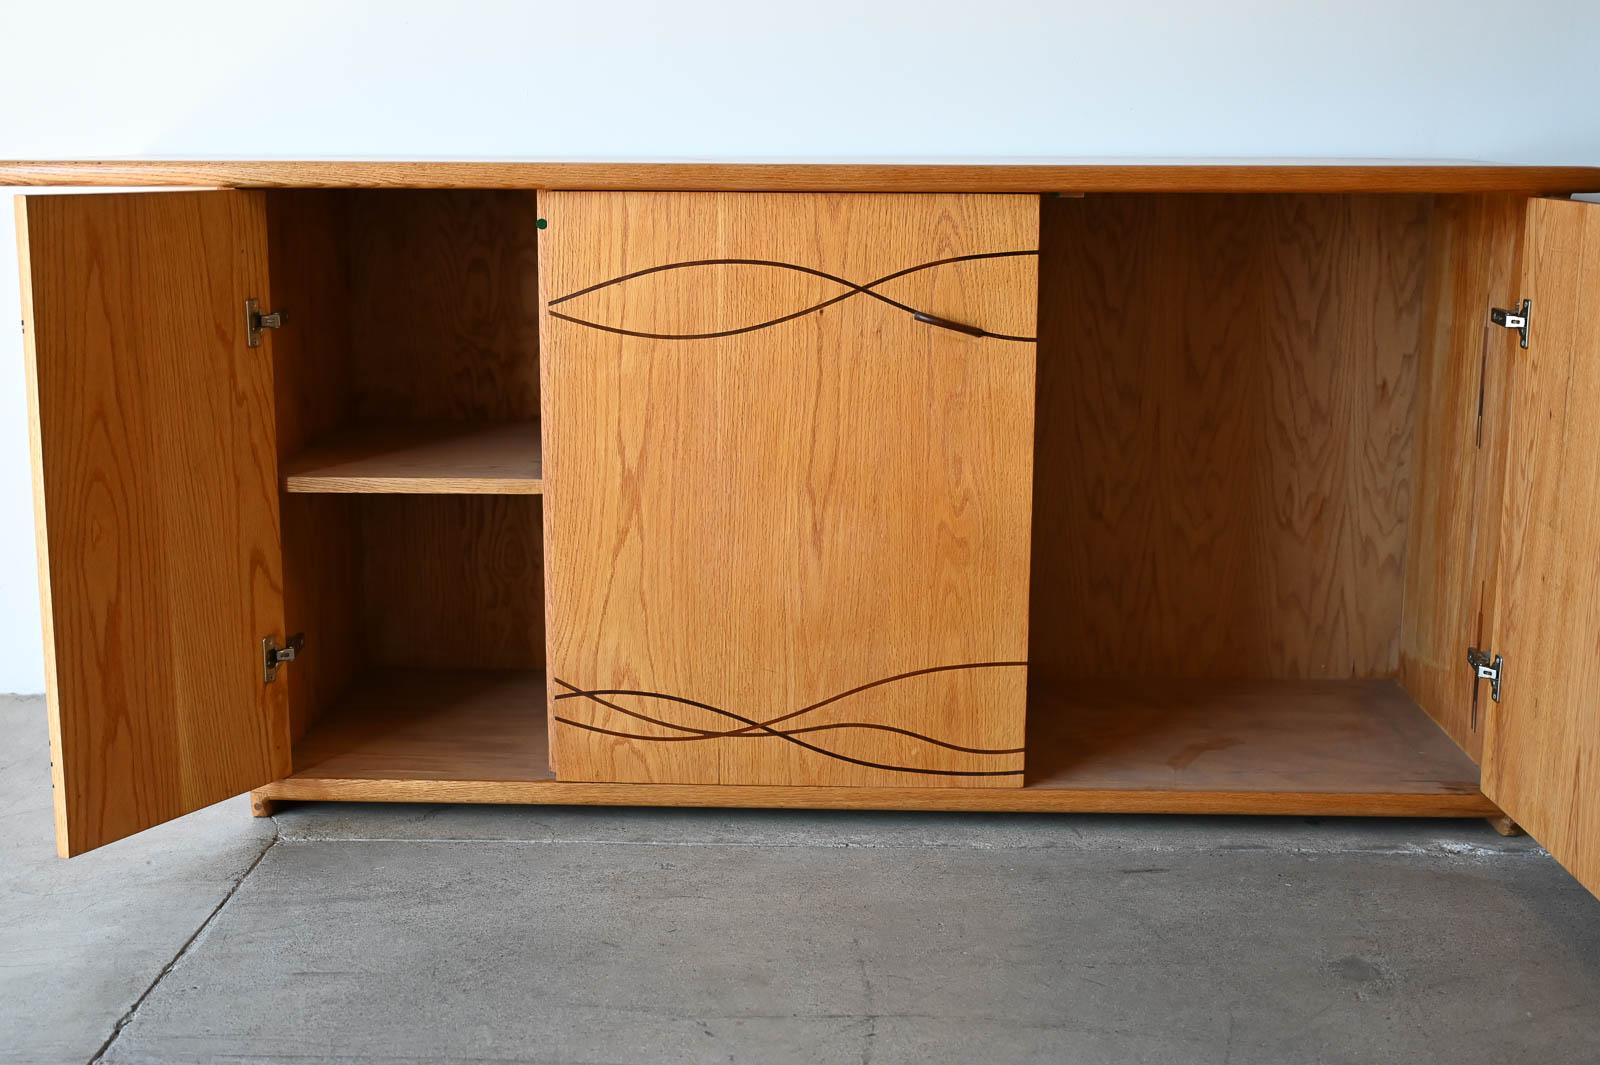 Bespoke Cabinet with Carved Inlay by Robert Squire Bierbaum, 1995 For Sale 4